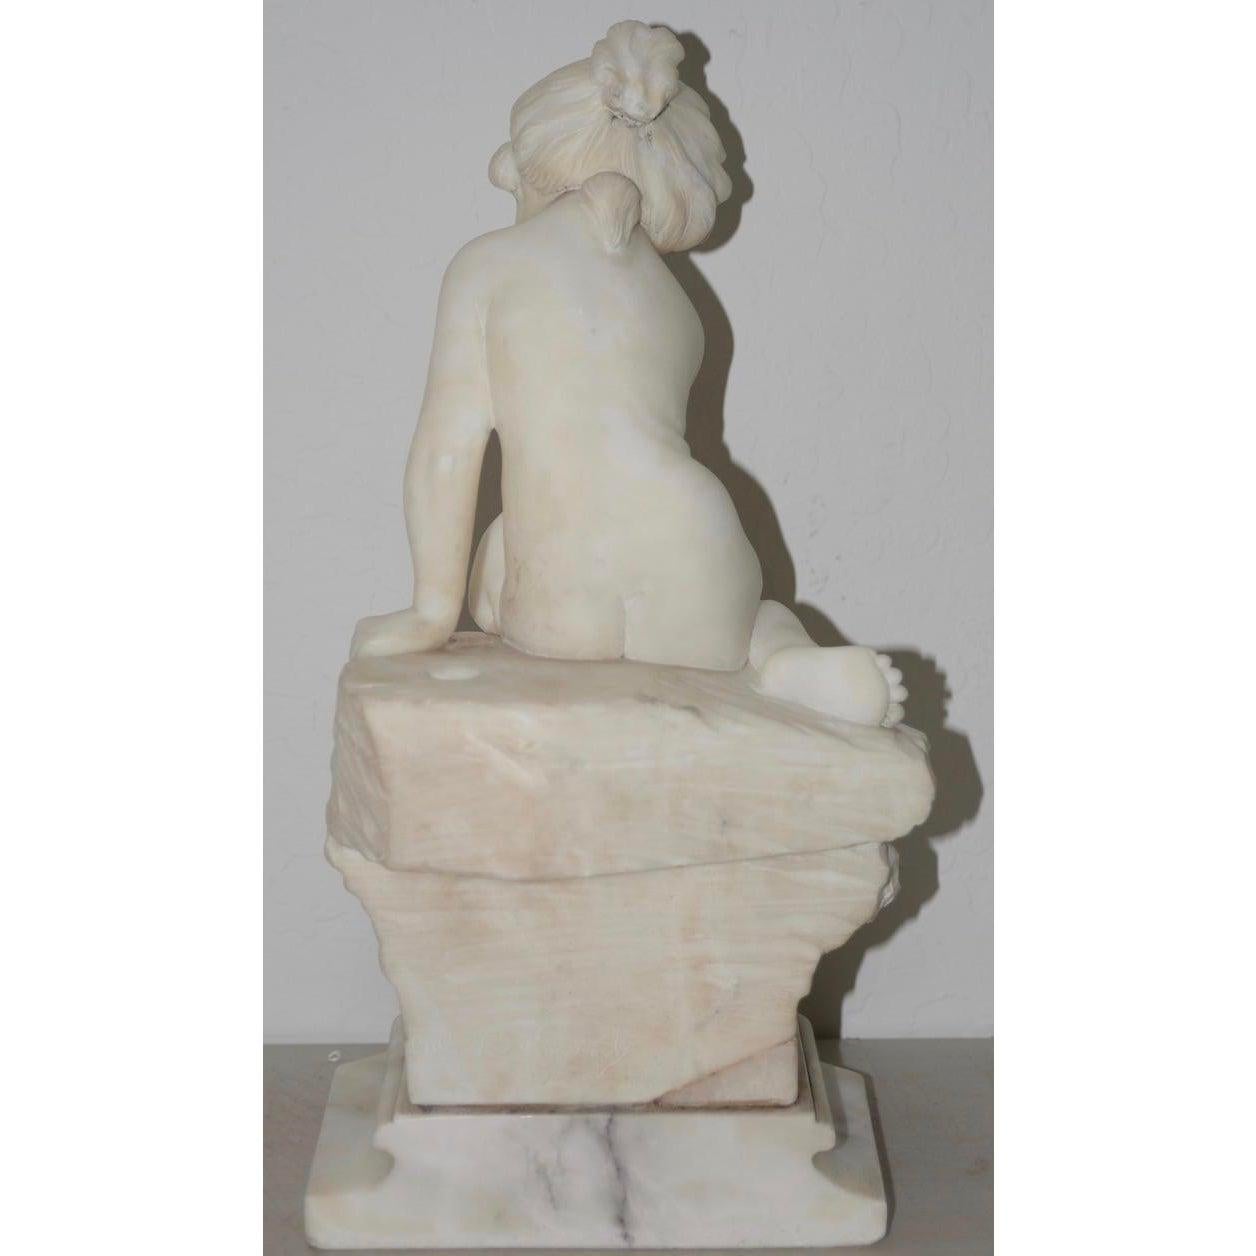 19th-early 20th century marble sculpture young child with kitten, circa 1920

Charming carved marble sculpture of a young child playing with a kitten.

The sculpture is signed on the back (illegible - see pics)

Dimensions 8.5